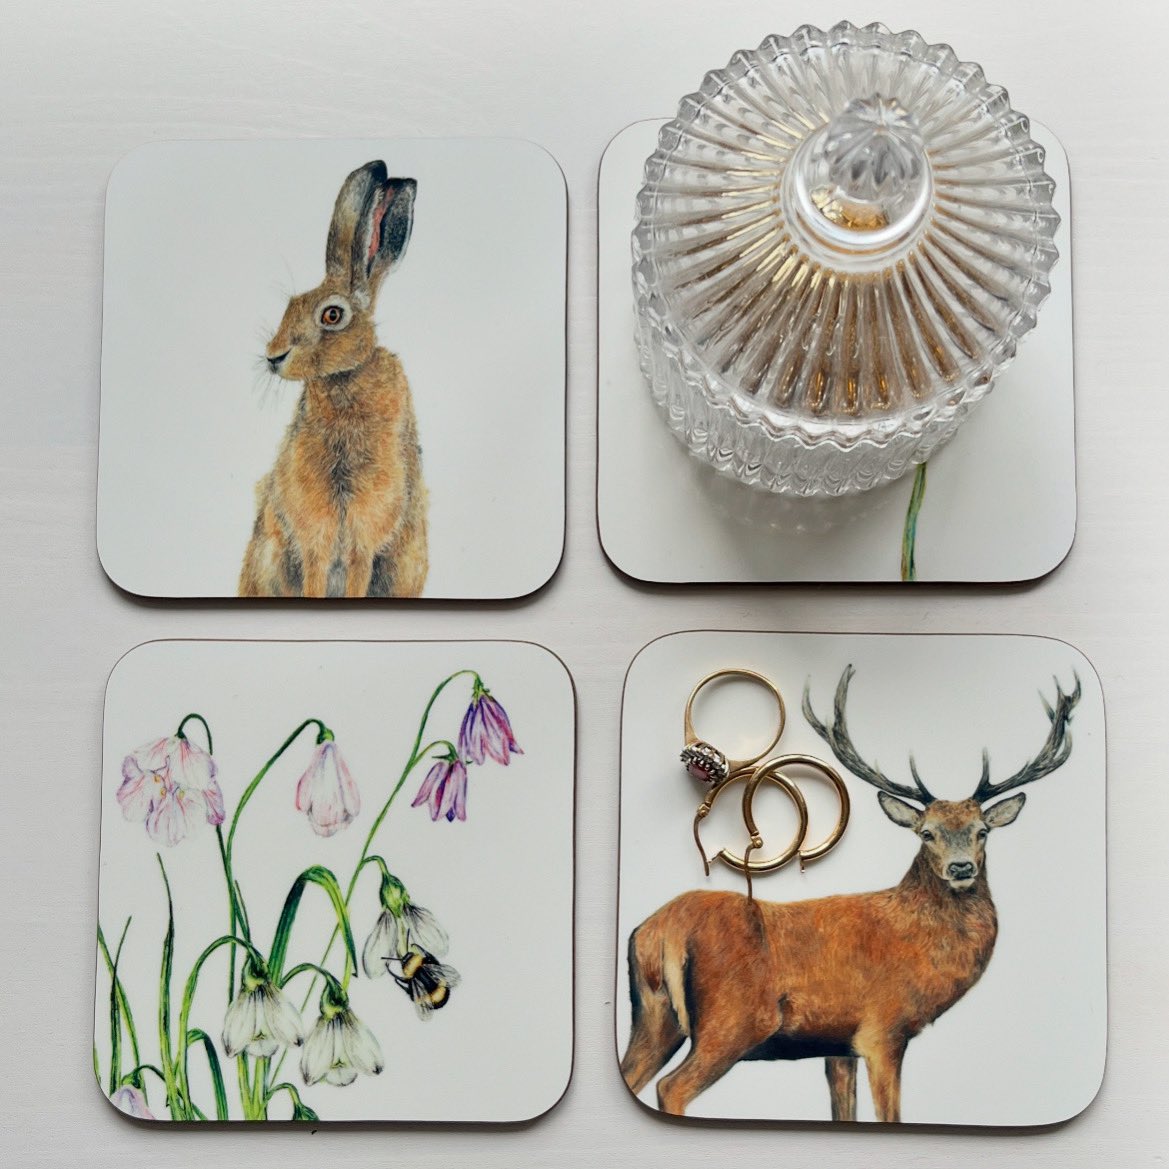 I always think coasters are such a lovely way of adding a splash of colour to your home ✨

#coasters #artforthehome #homedecor #britishwildlife #artist #colouredpencil #colouredpencilartist #natureart #giftideas